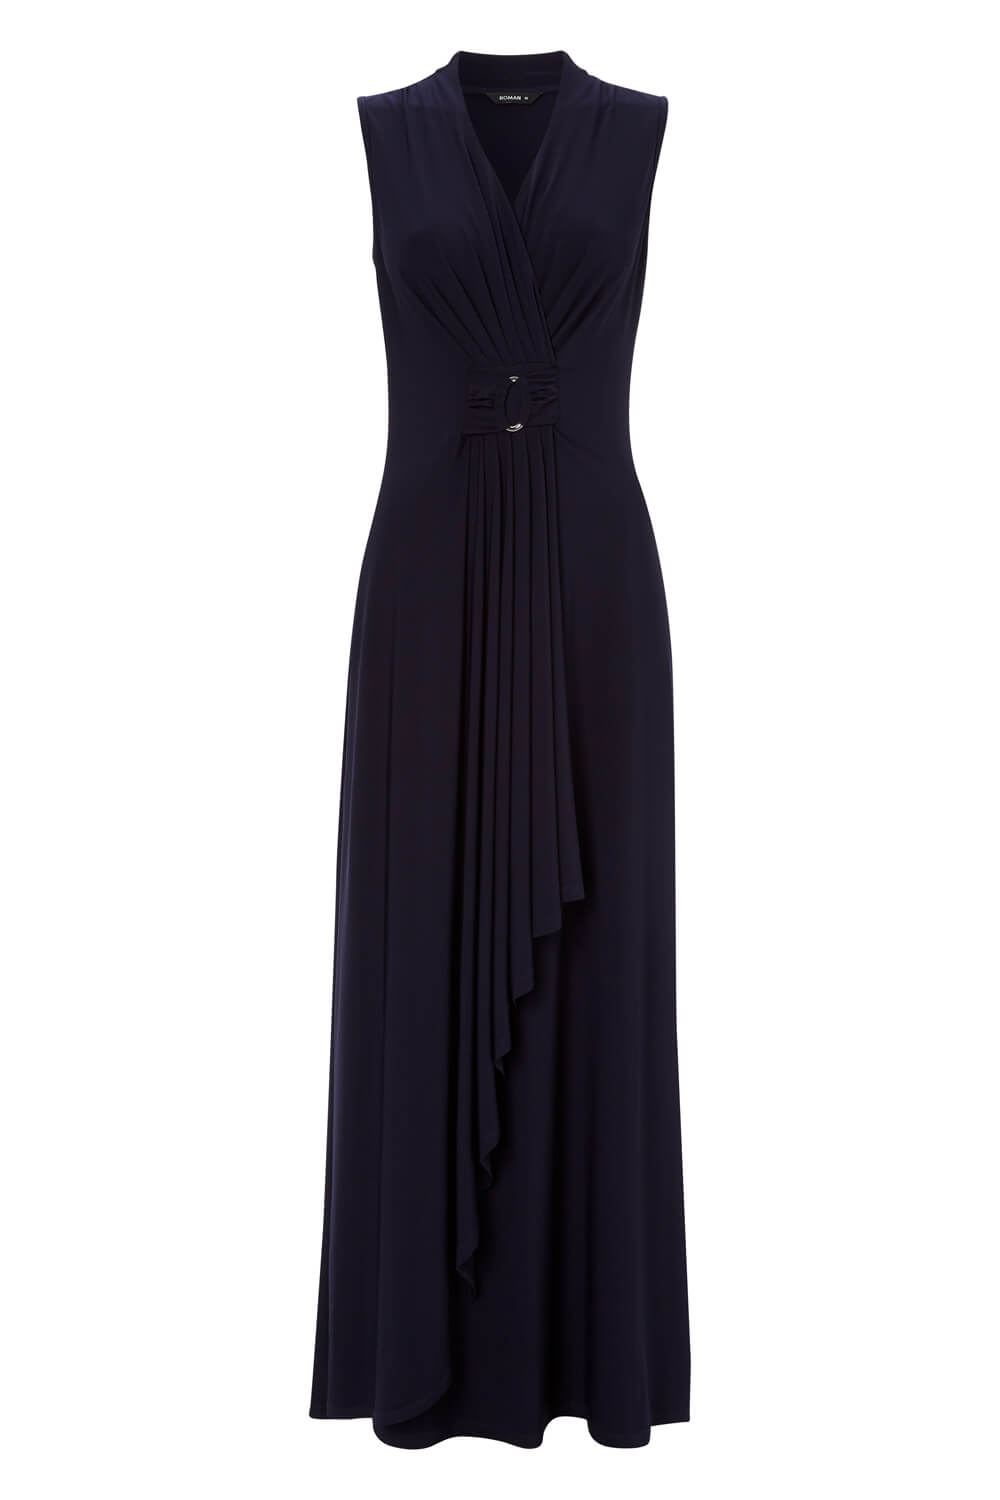 Navy  Waterfall Buckle Maxi Dress, Image 4 of 4